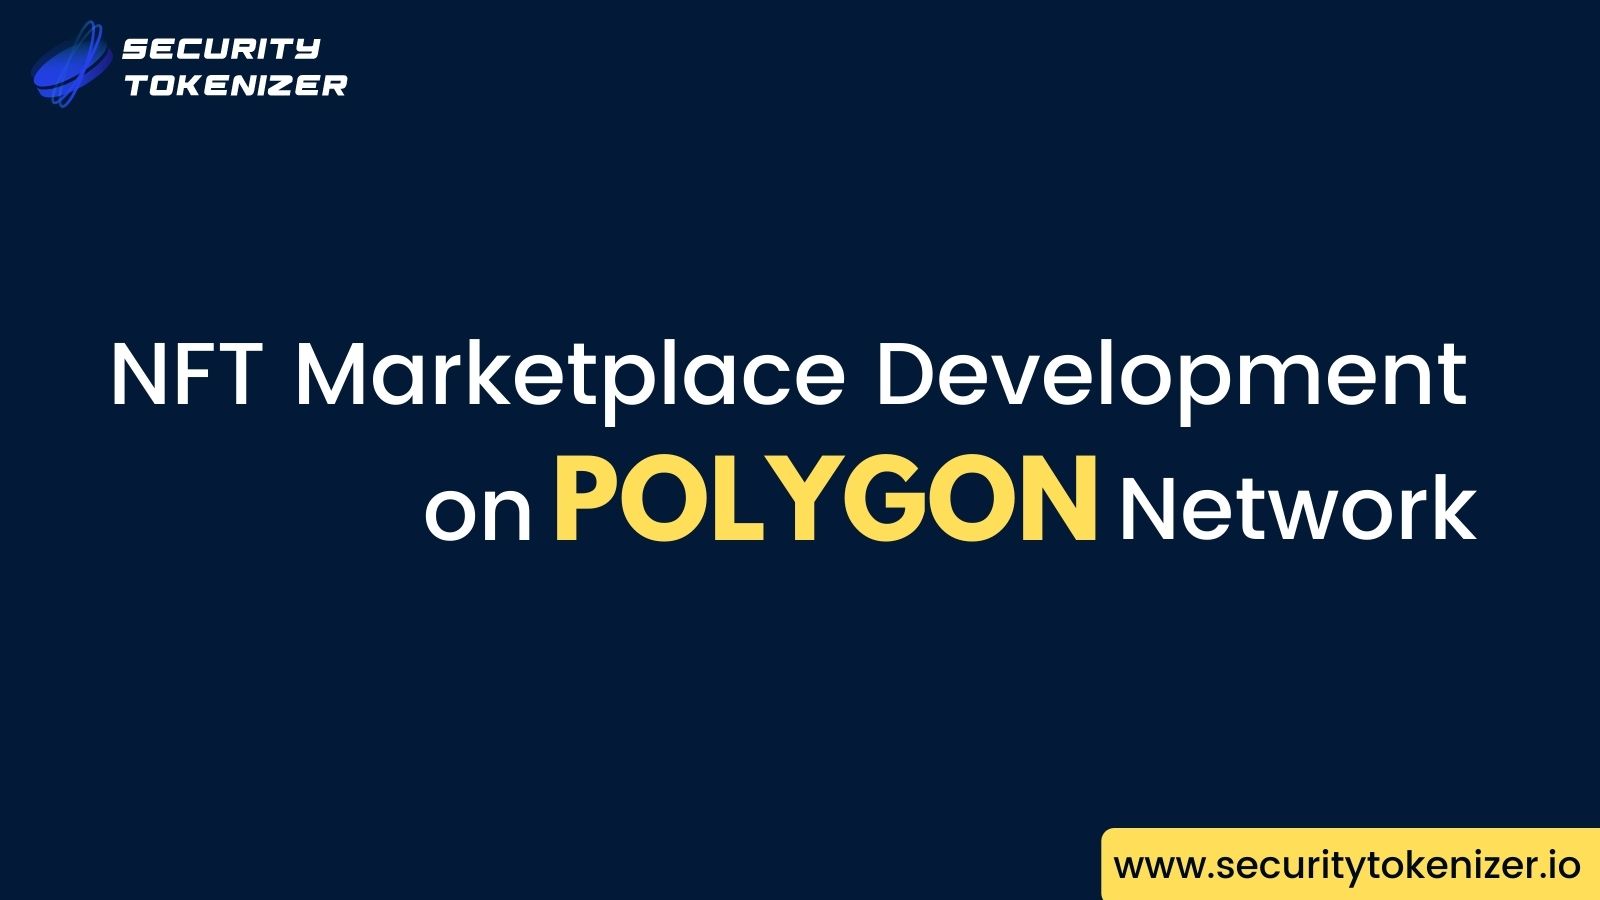 Article about Reasons to Build NFT Marketplace Development on Polygon